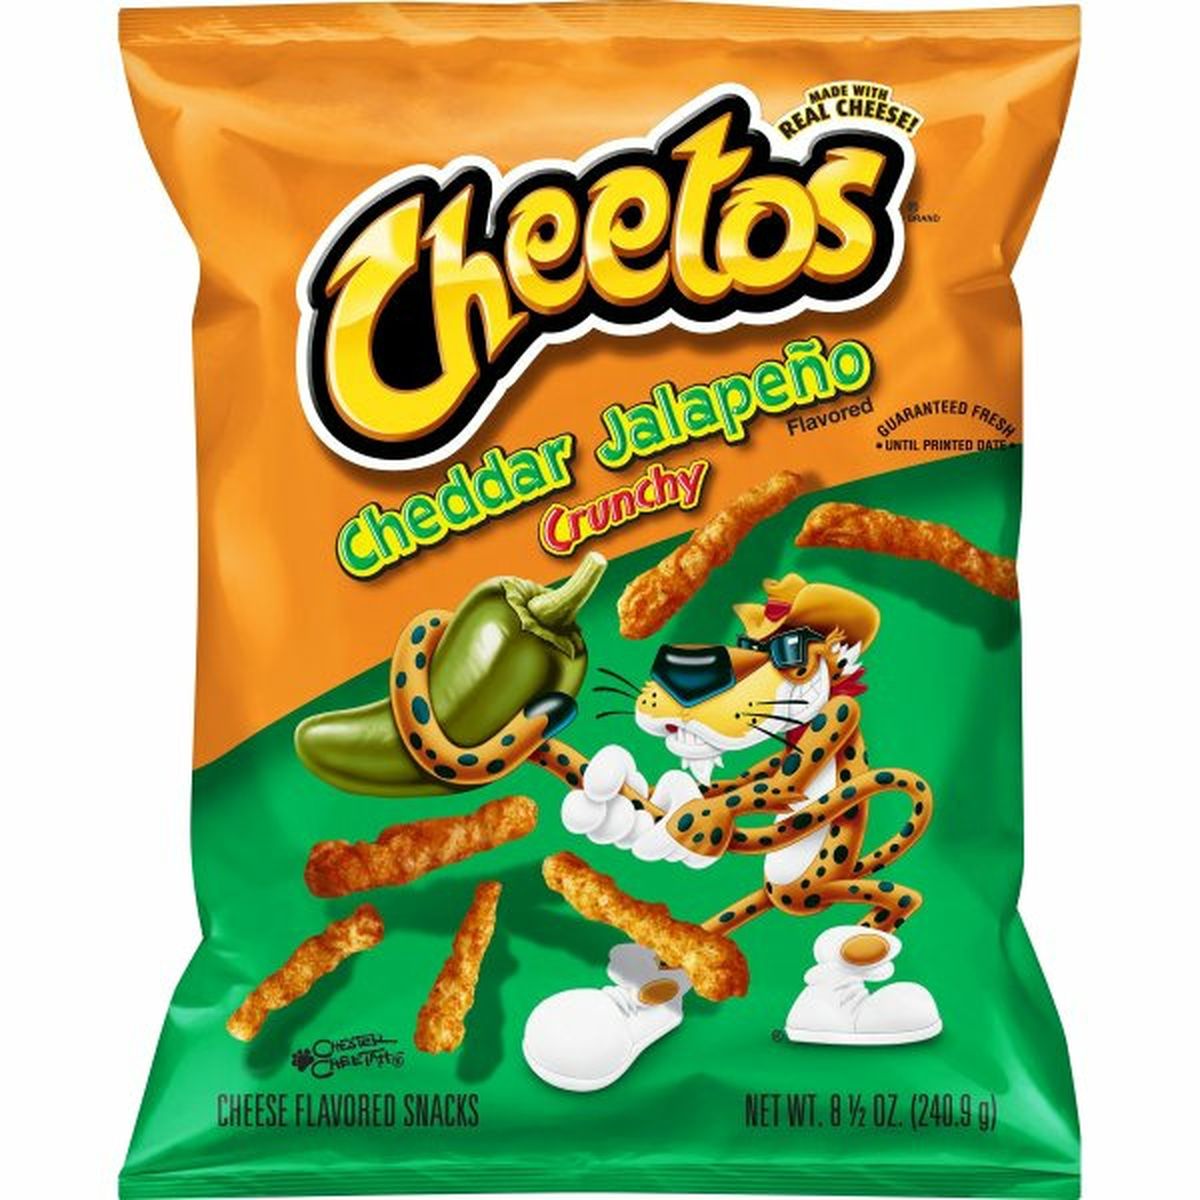 Calories in CHEETOS Crunchy Snack Mix, Cheddar And Jalapeno